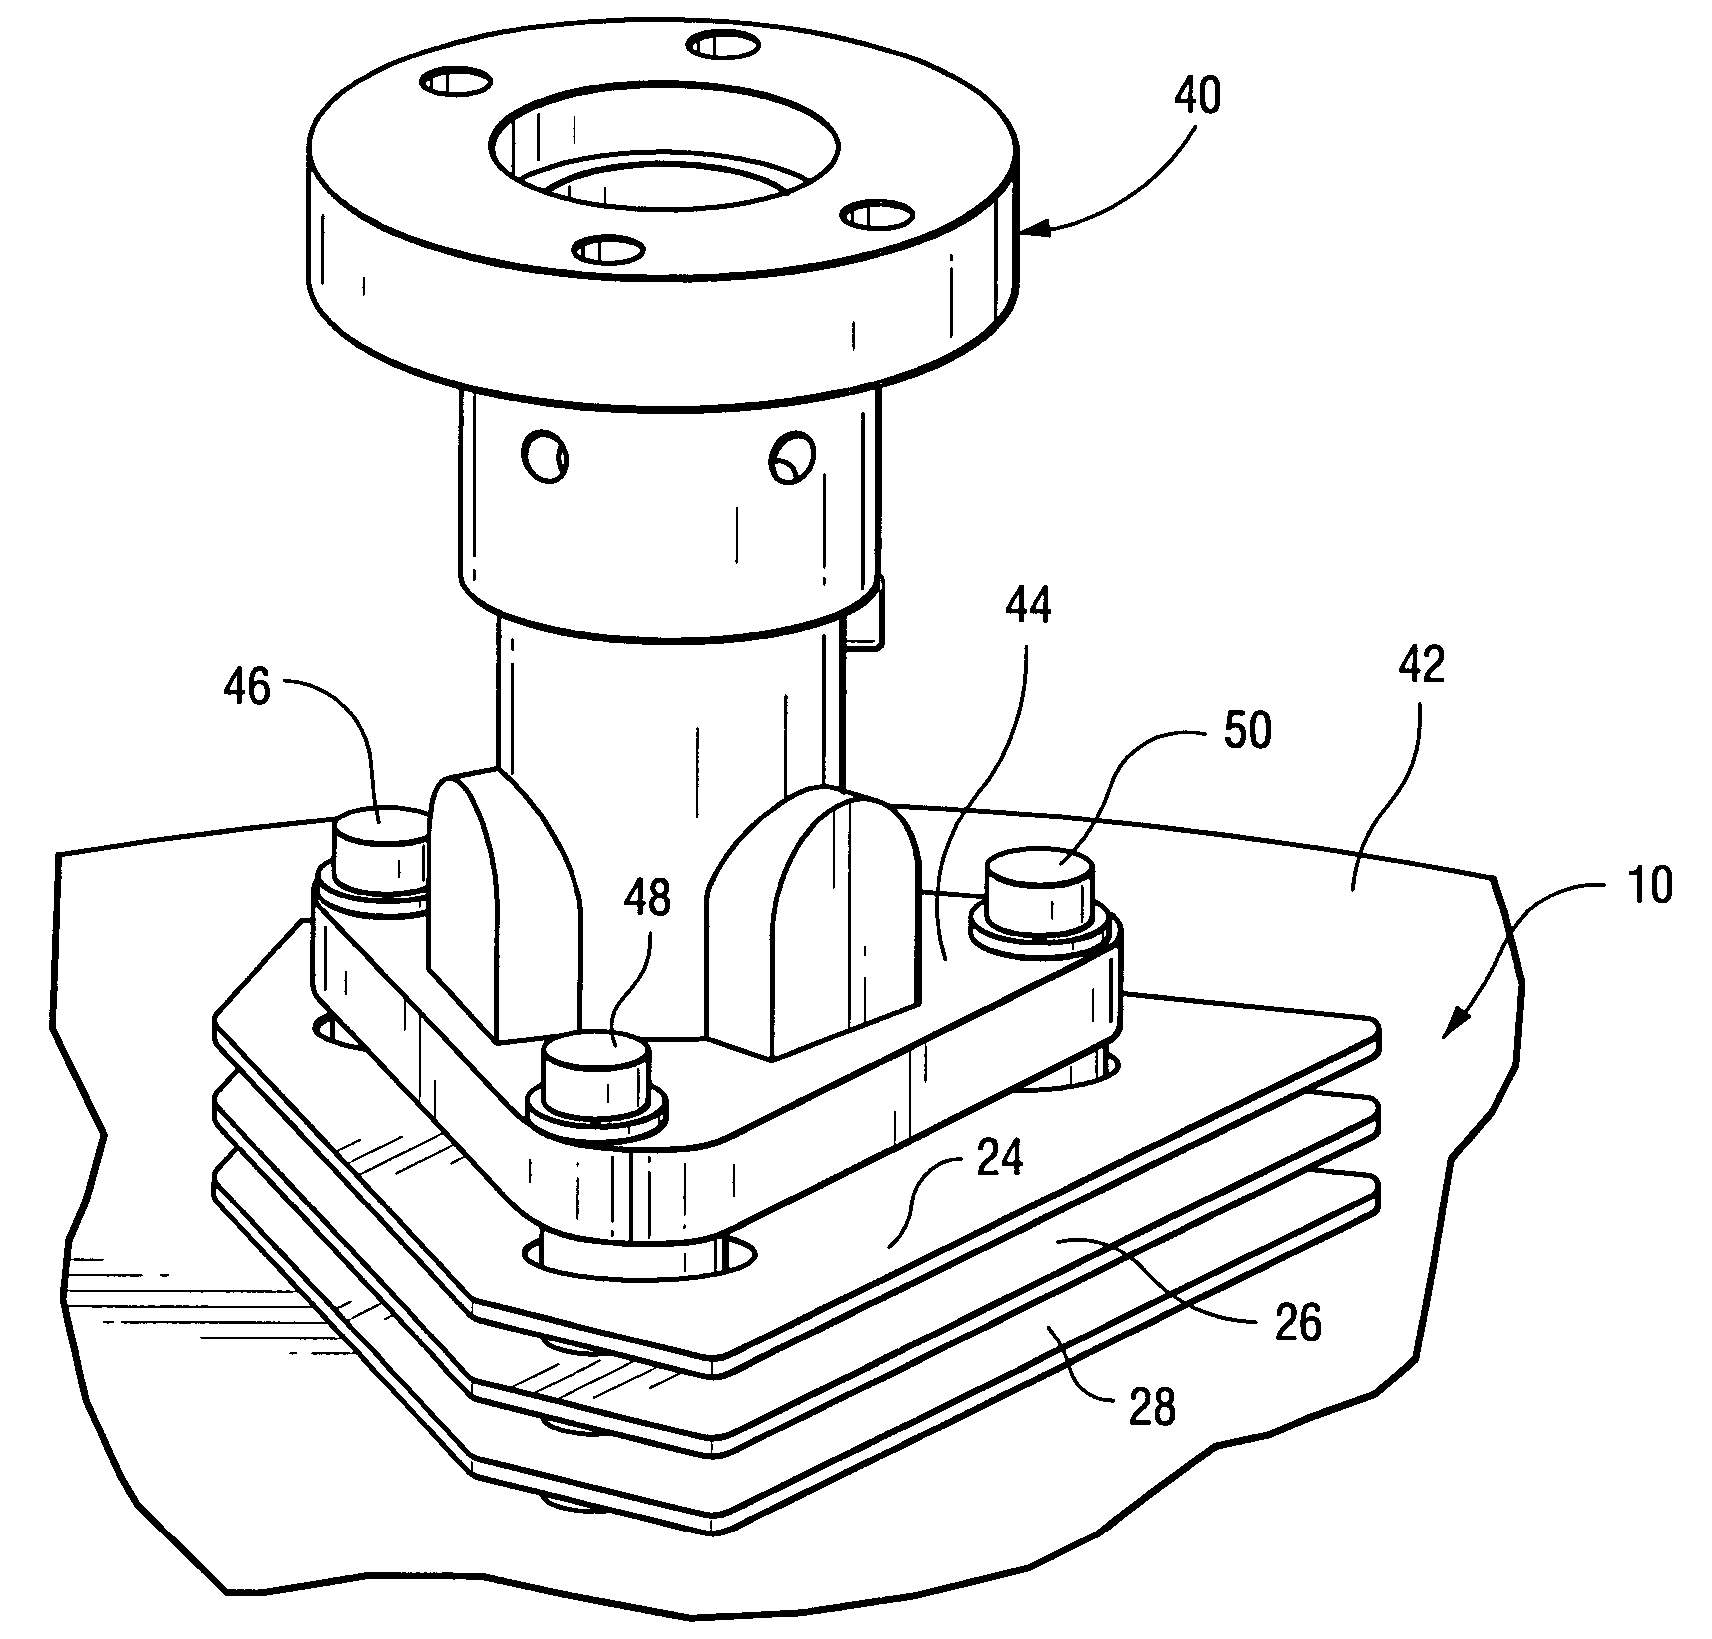 Thermal isolation device for liquid fuel components